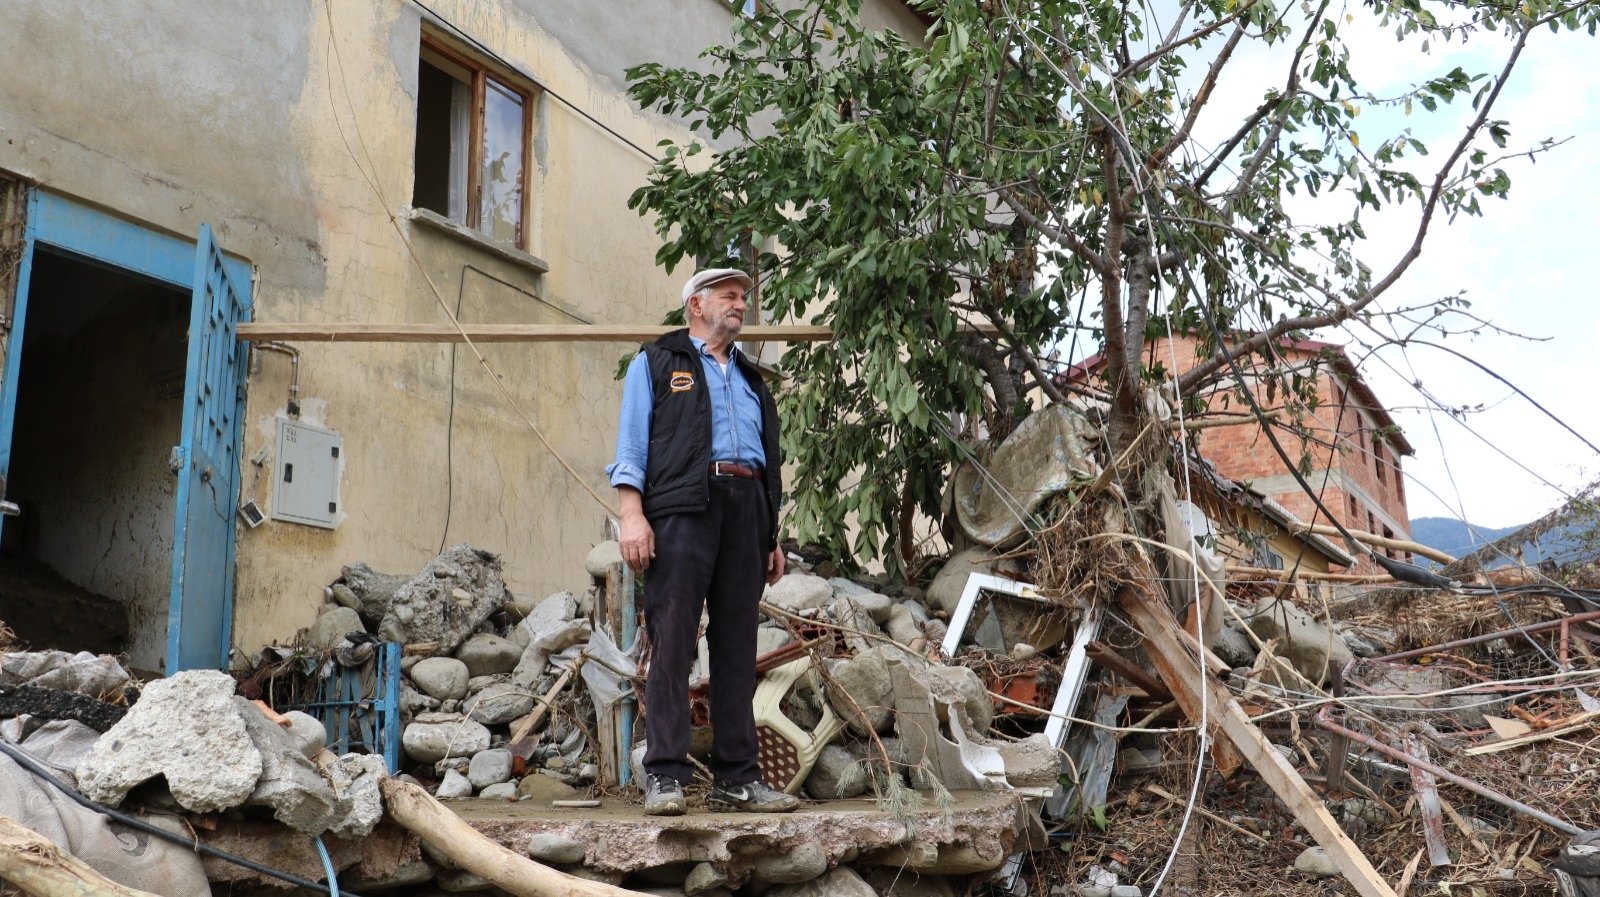 A man stands among debris outside his home in Babaçay, in Sinop, northern Turkey, Aug. 15, 2021. (DHA PHOTO) 